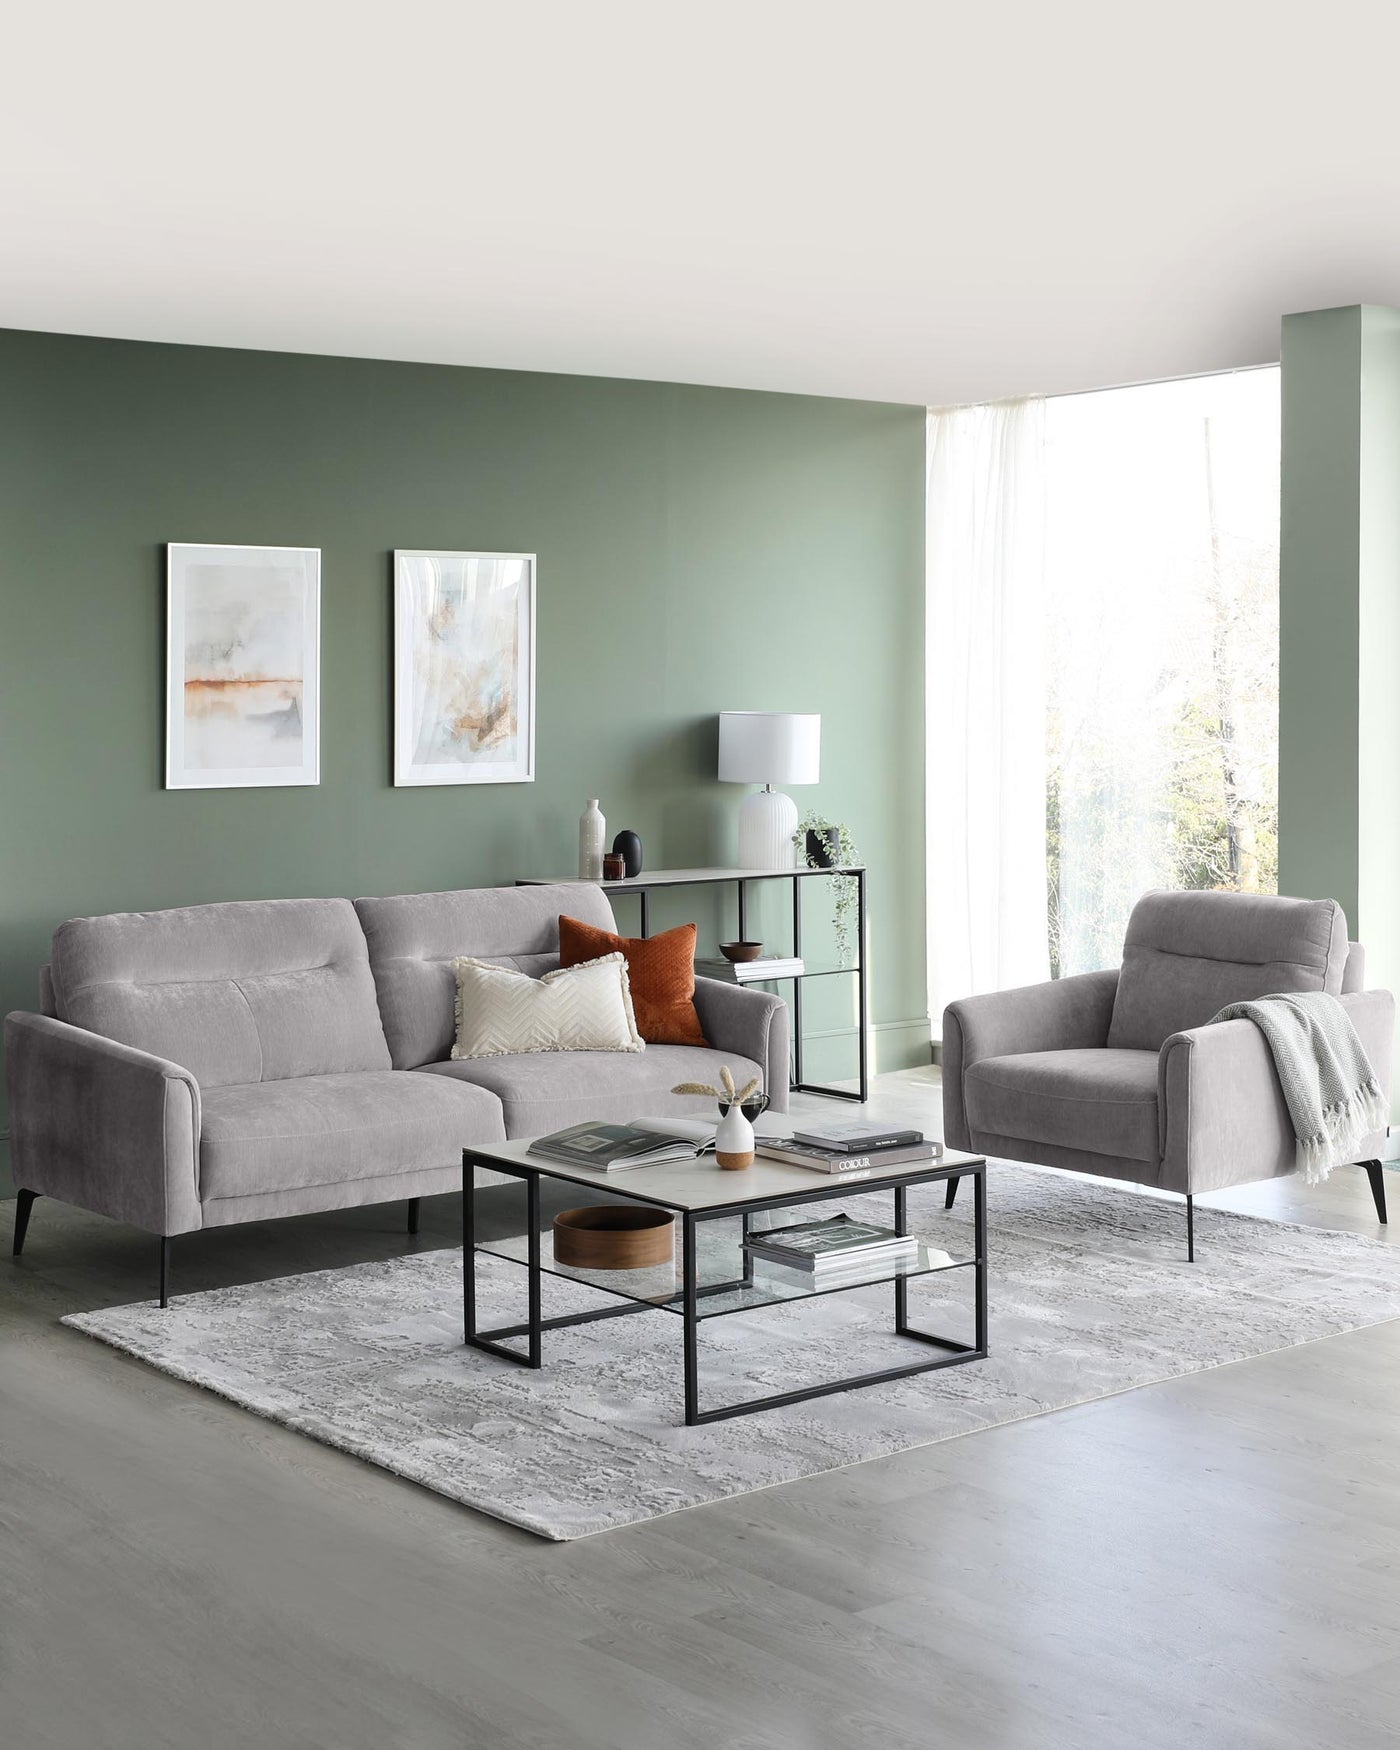 Contemporary living room set featuring a light grey upholstered sofa with two matching cushioned armchairs, complemented by a geometric black metal framed coffee table with a glass top and a coordinating side table. The arrangement is centred on a soft grey area rug over a neutral floor.